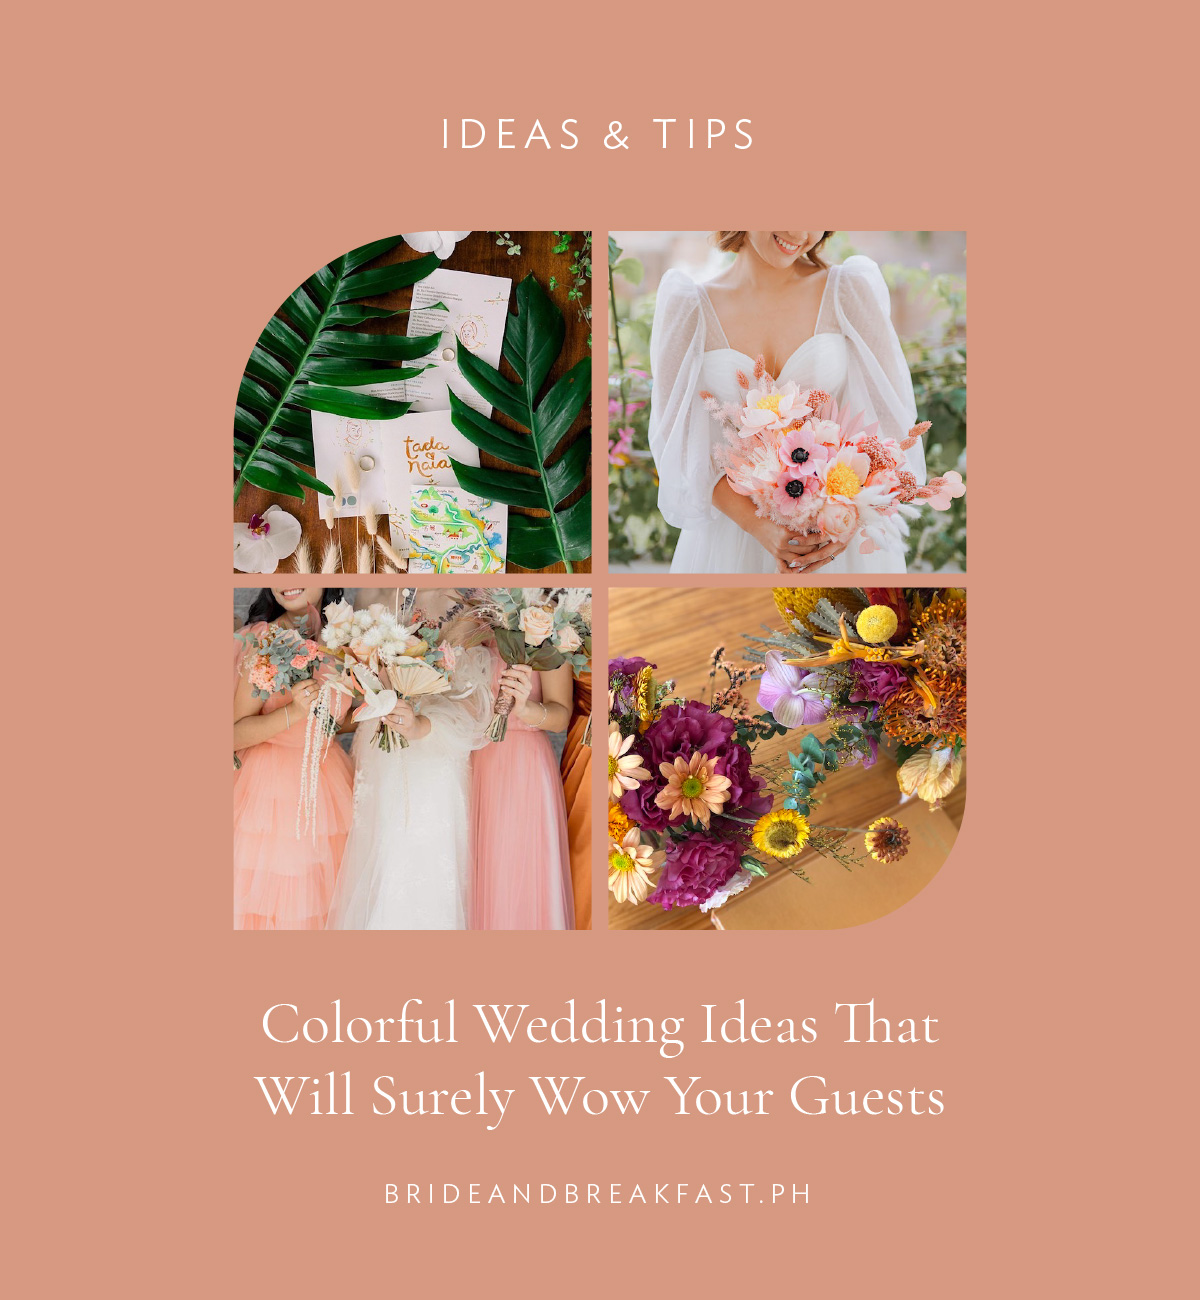 Colorful Wedding Ideas That Will Surely Wow Your Guests